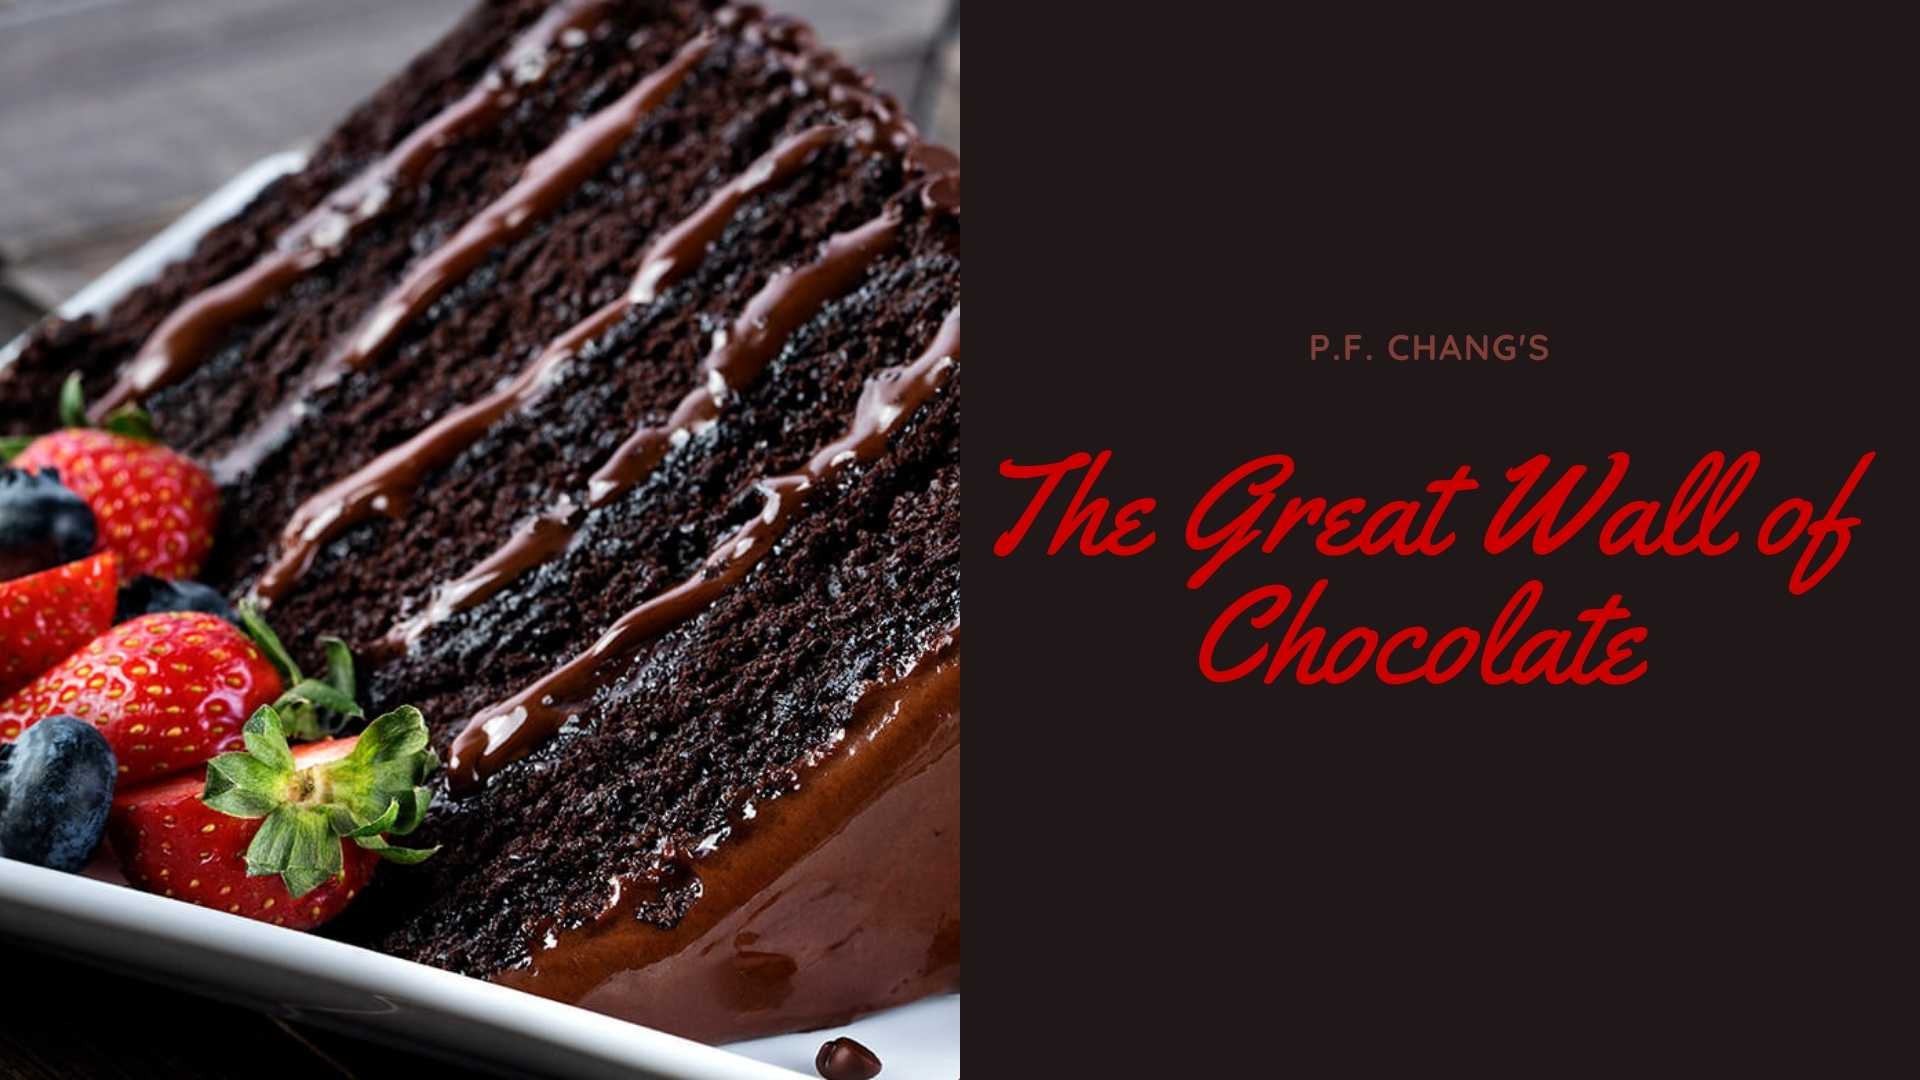 P.F. Chang's The Great Wall of Chocolate